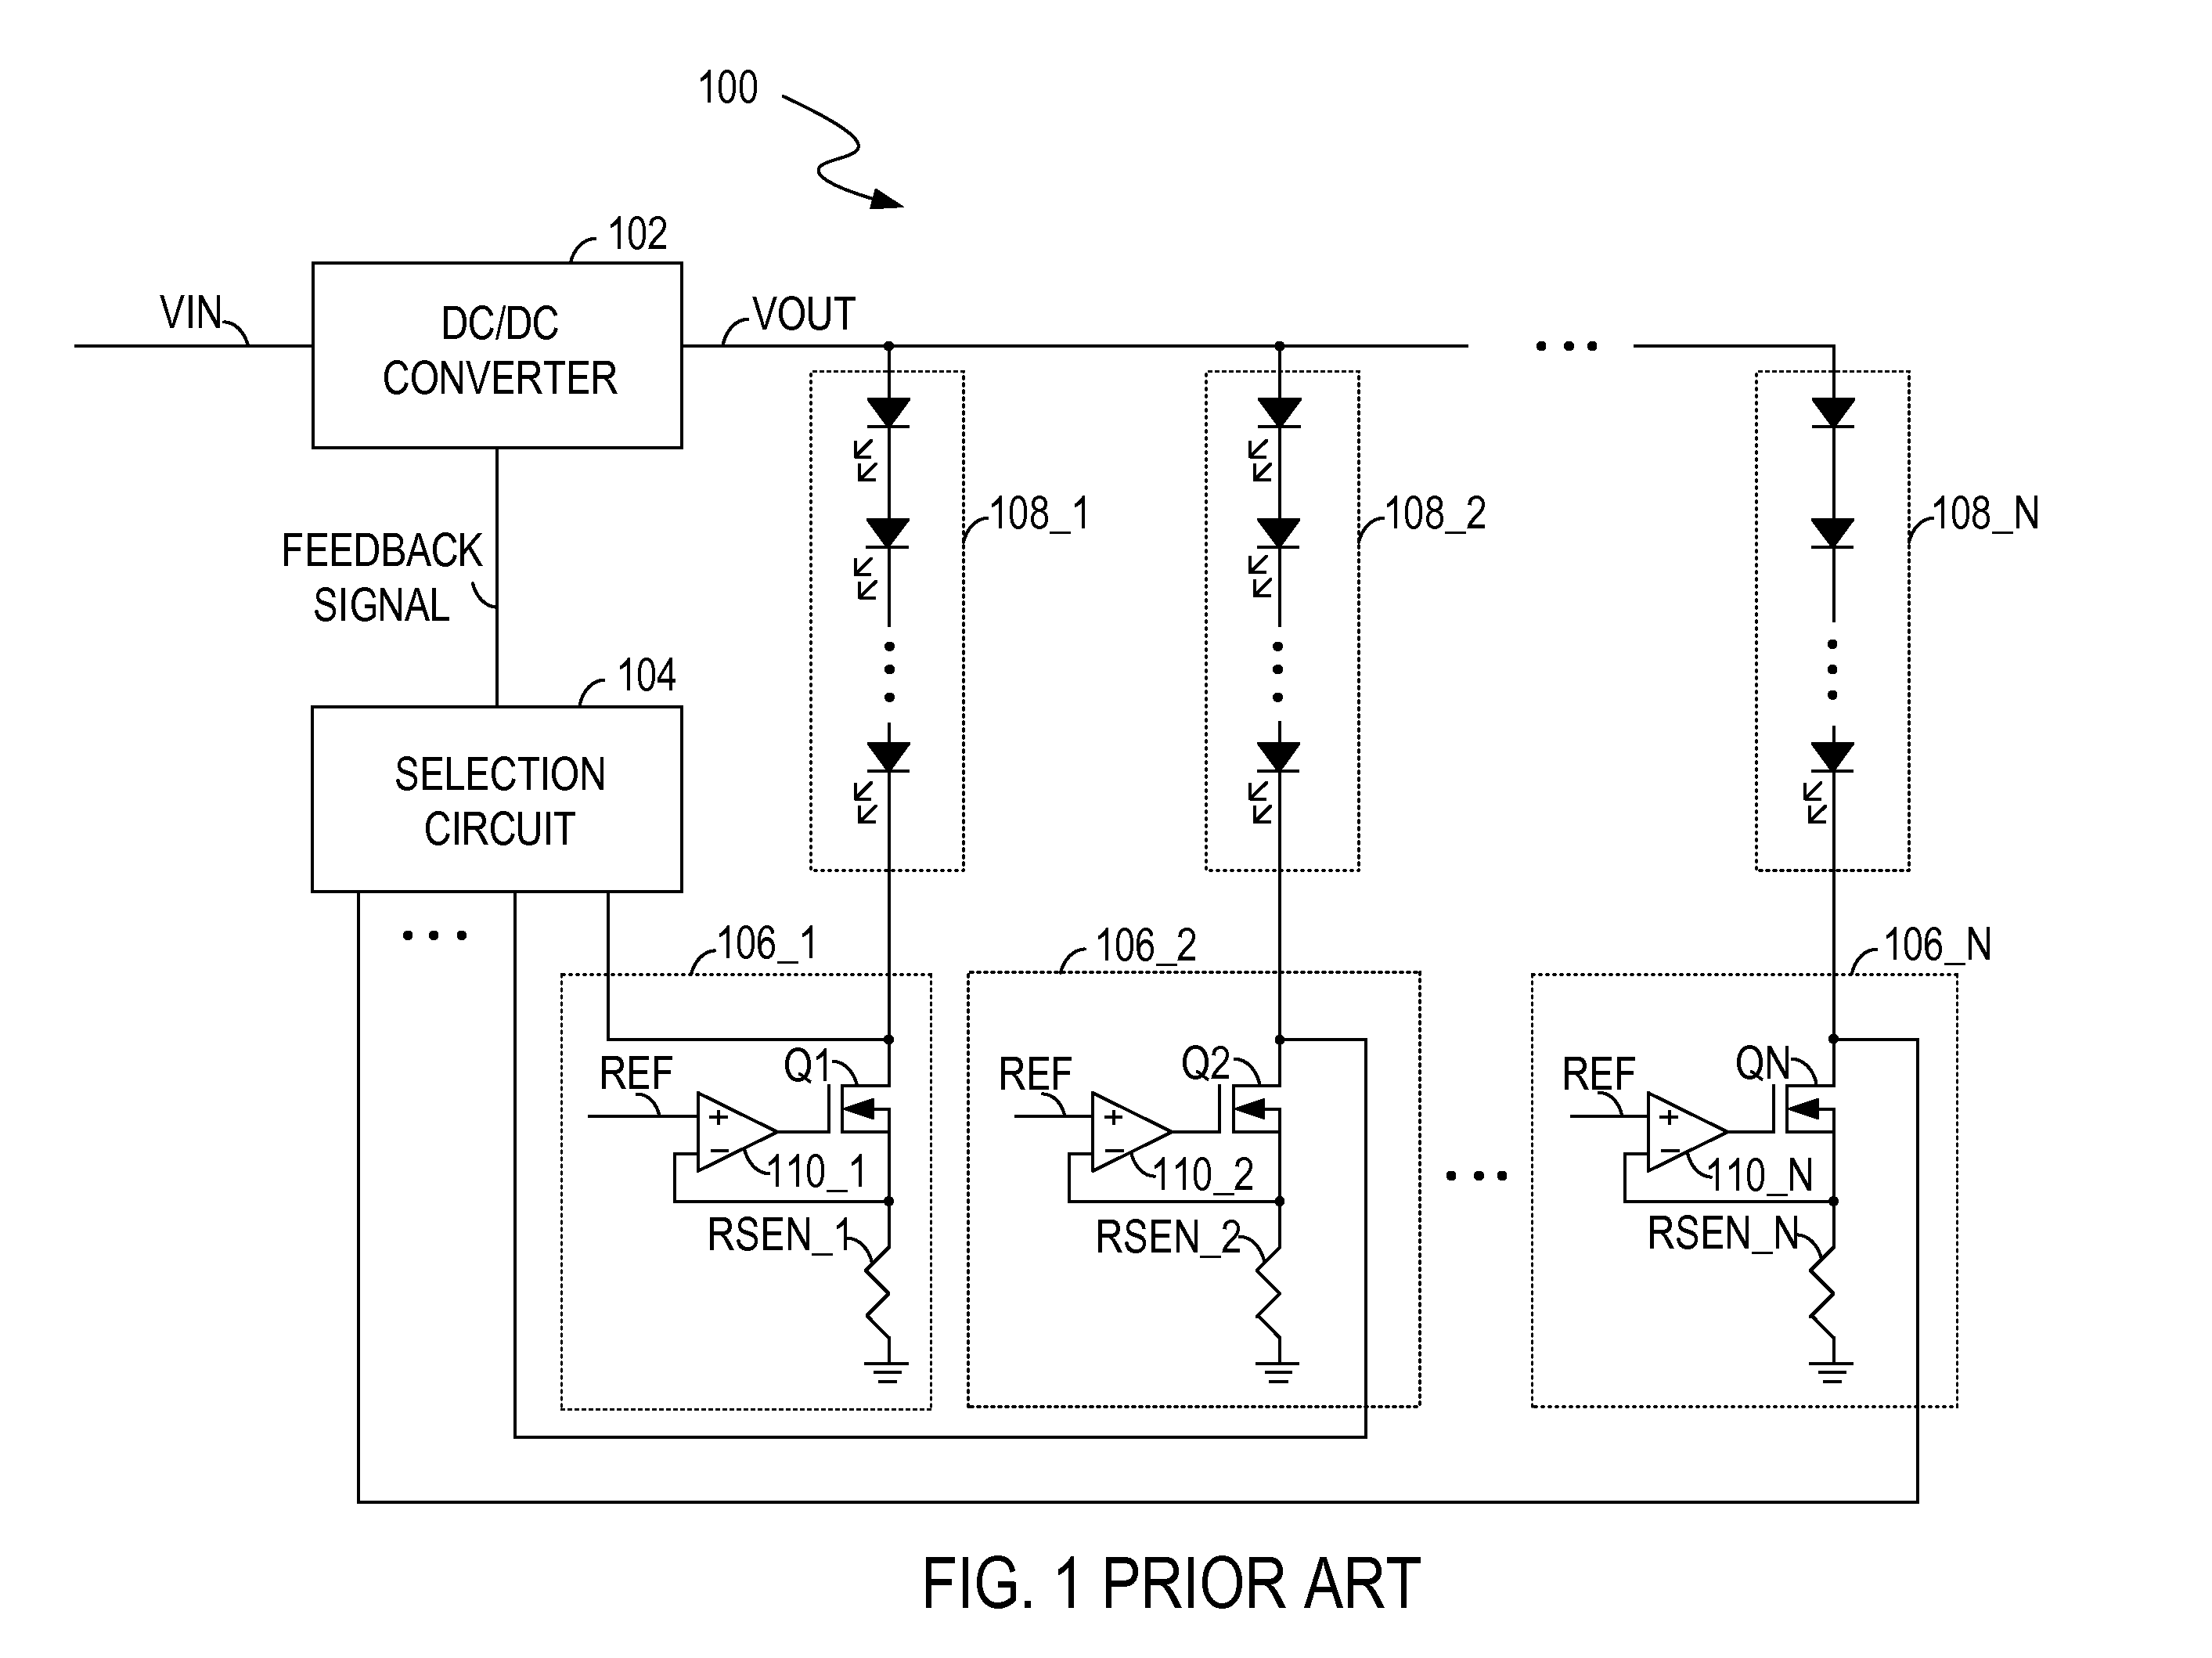 Circuits and methods for powering light sources